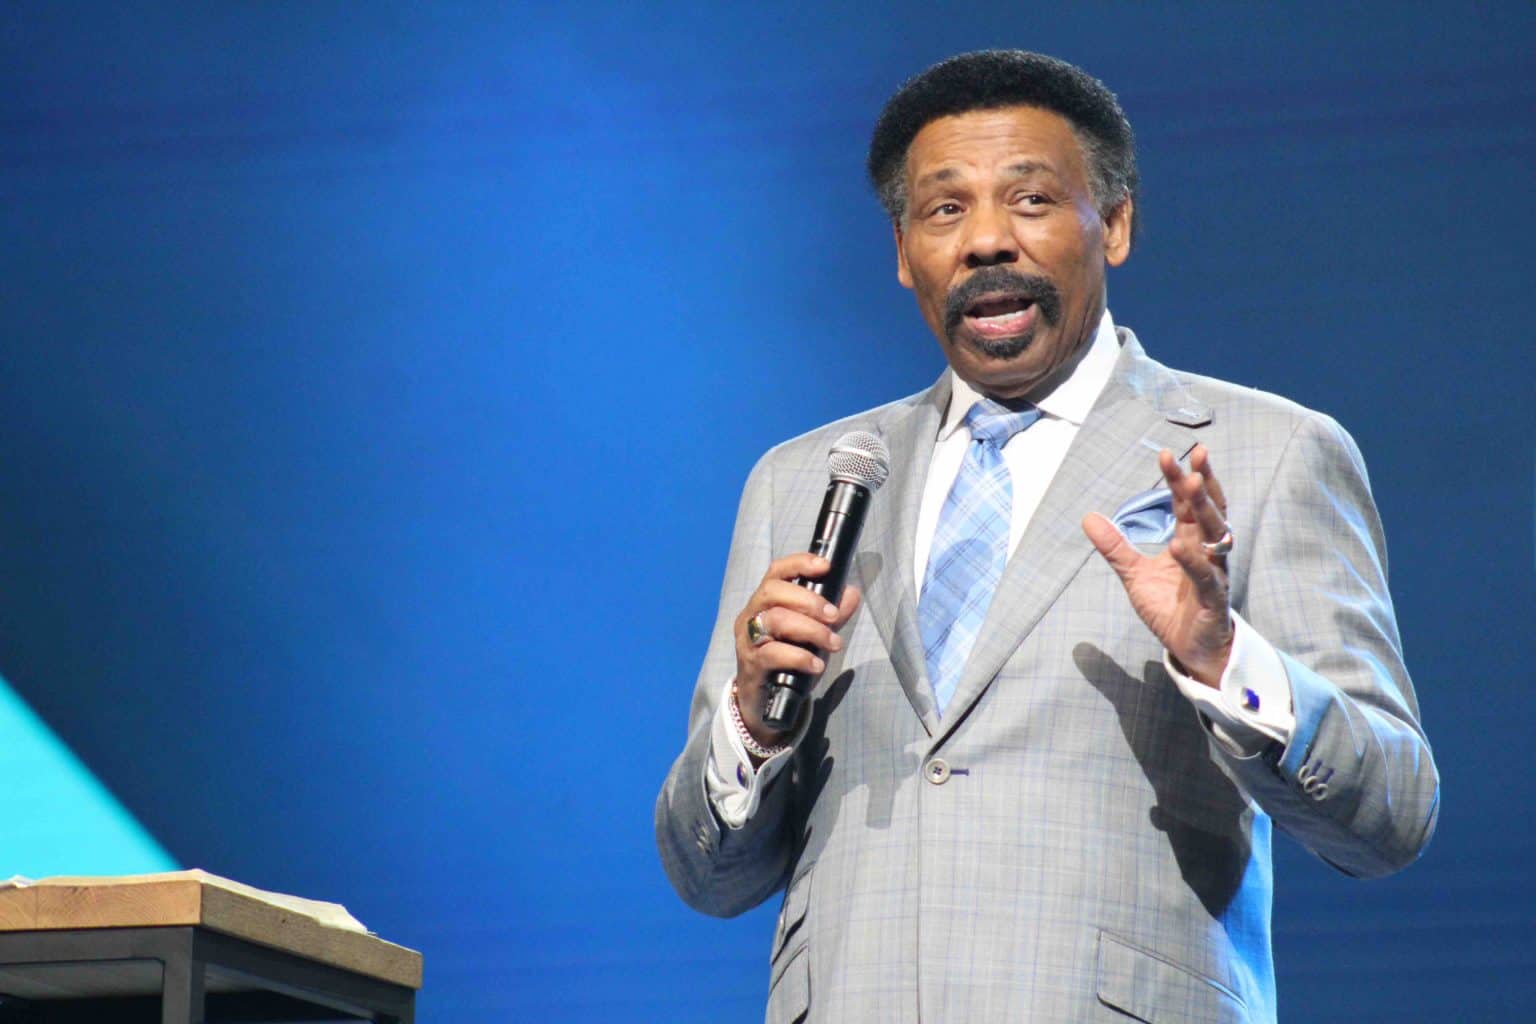 Tony Evans Urges Christians to ‘Claim Christ Above All’ at Send